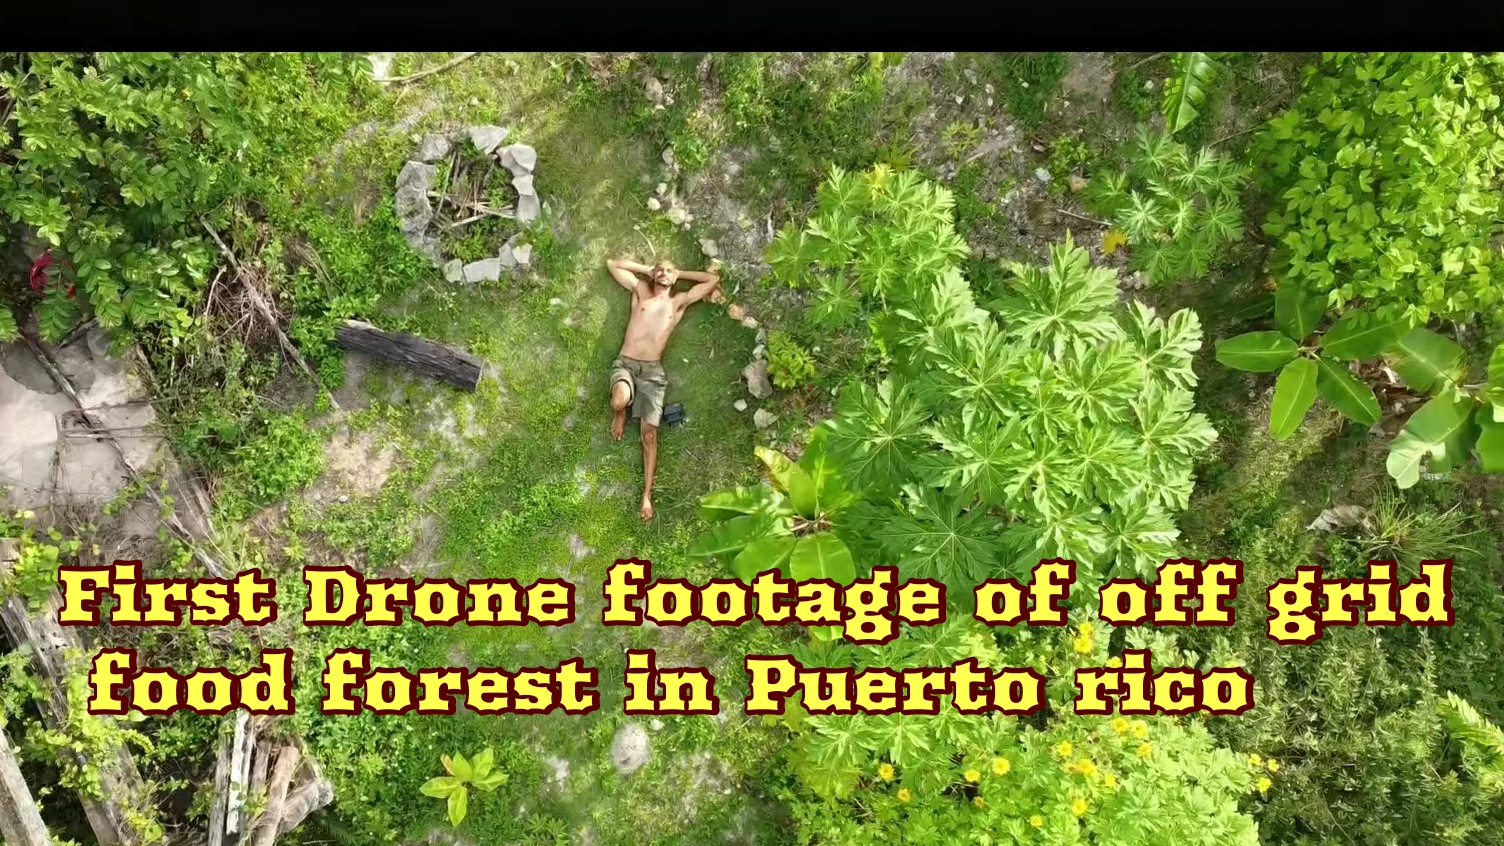 Drone Puerto Rico food forest jungle